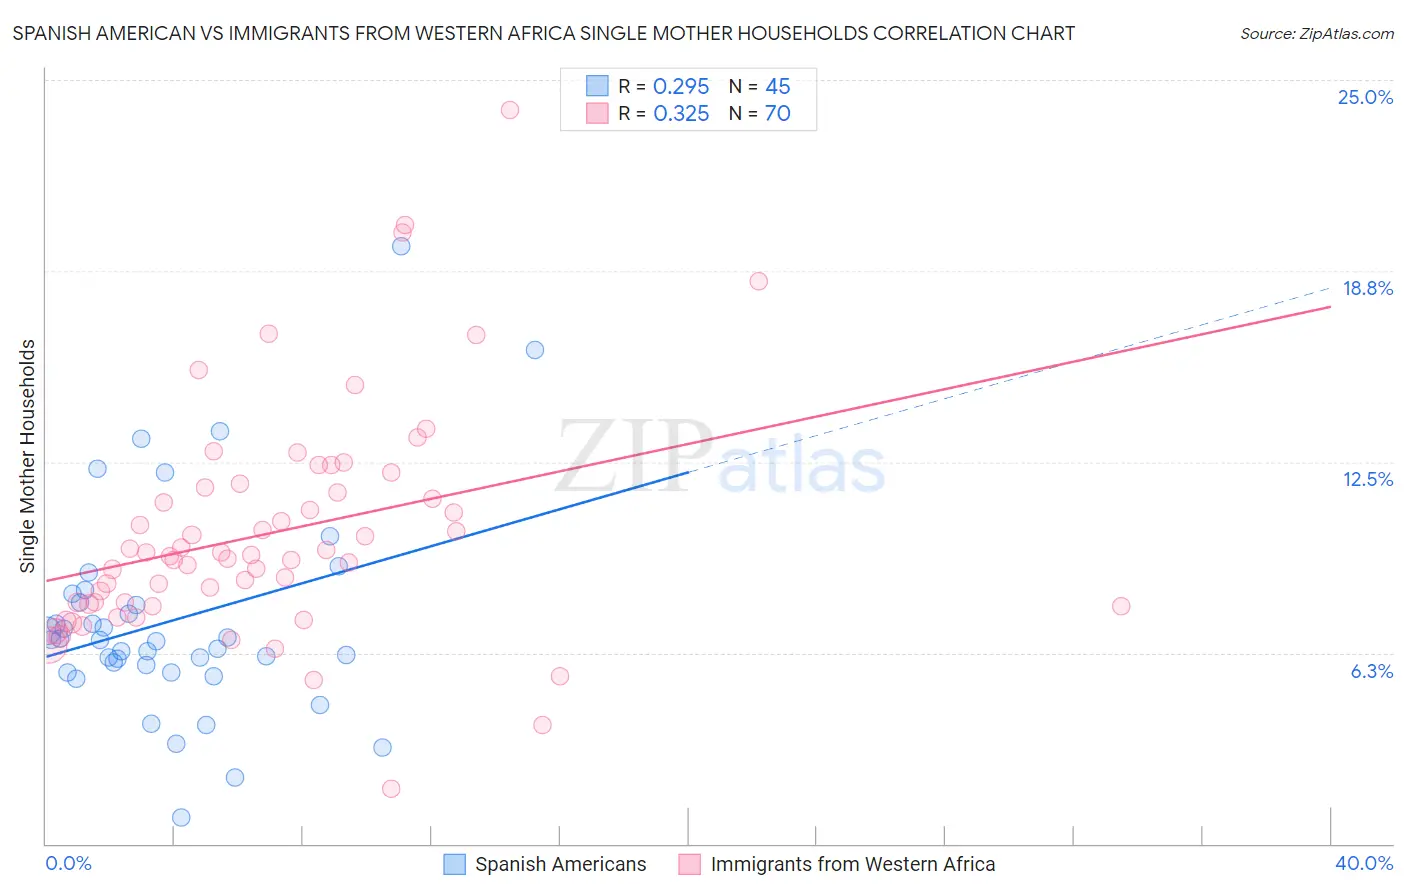 Spanish American vs Immigrants from Western Africa Single Mother Households